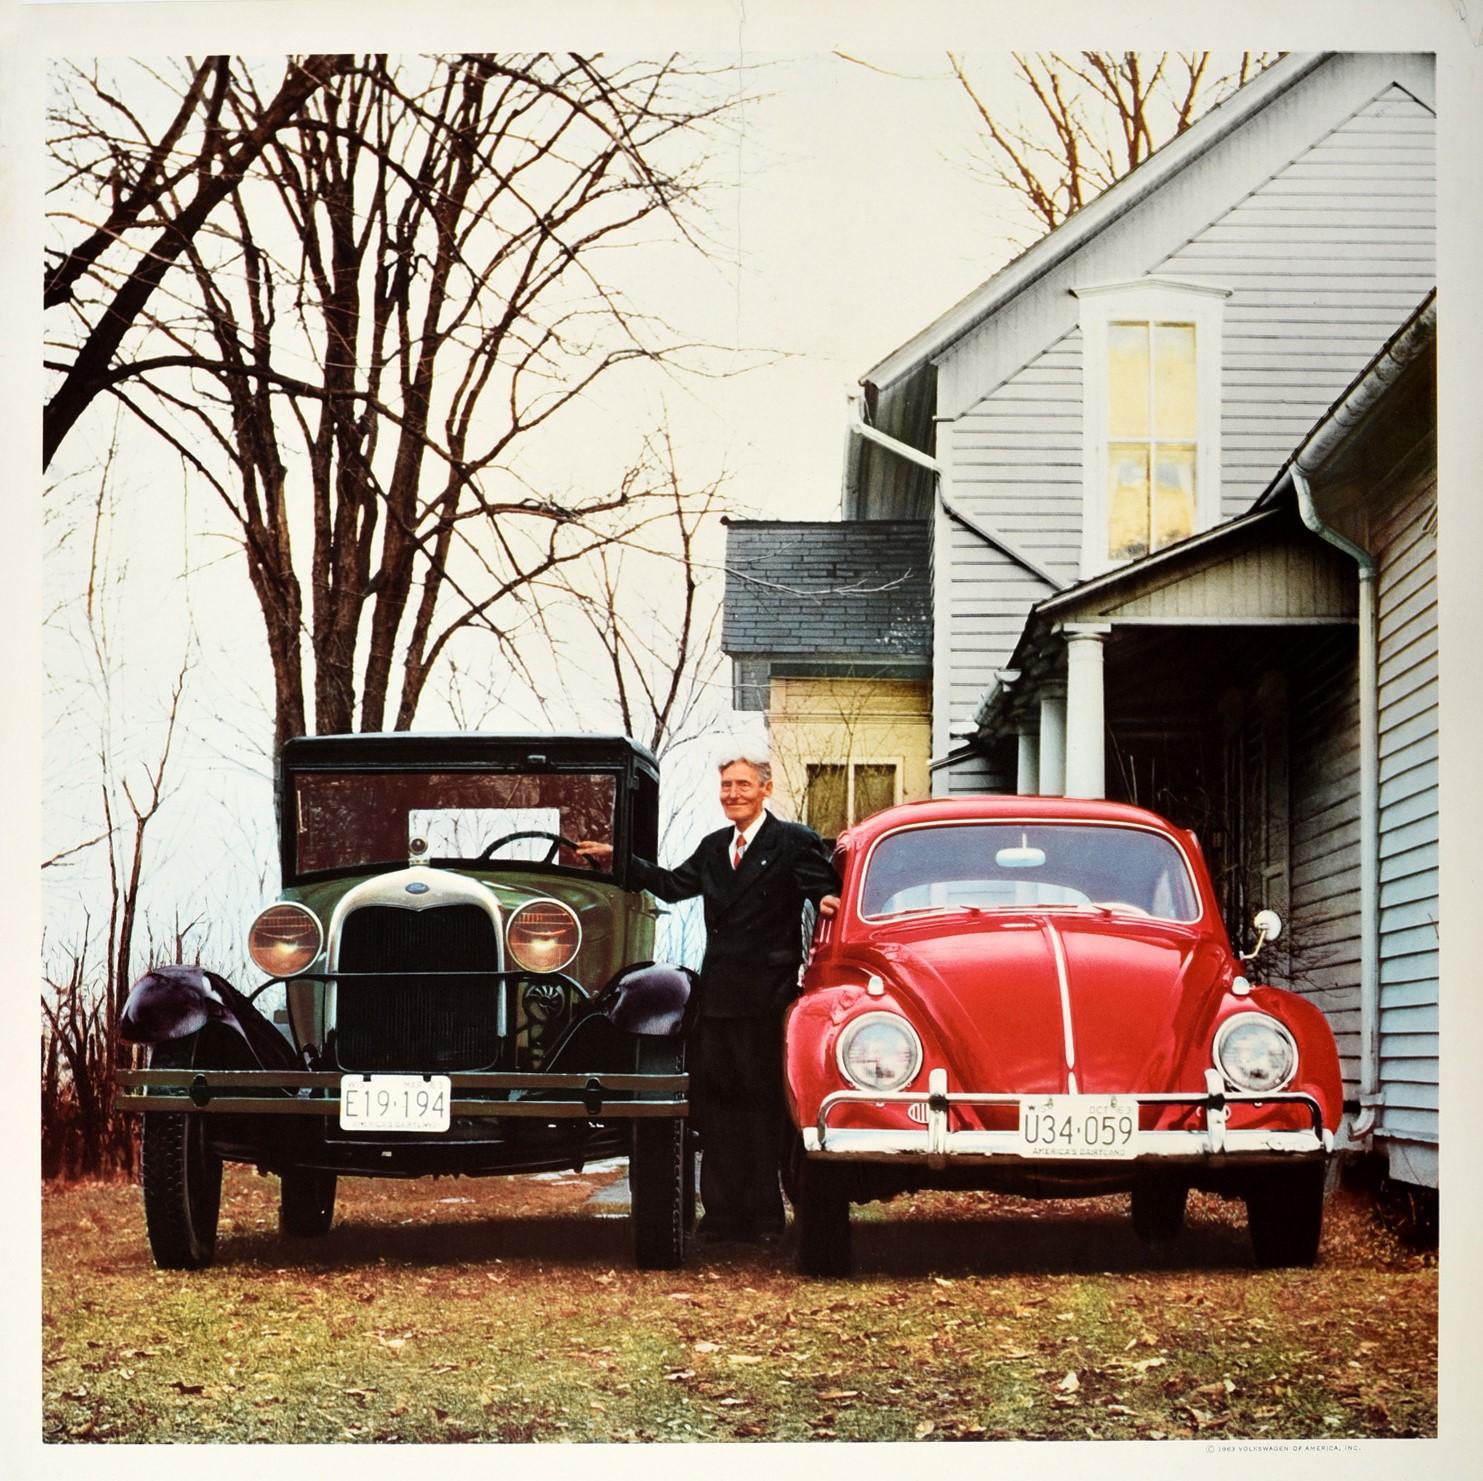 Original vintage car advertising poster for Volkswagen Beetle - 33 years later, he got the bug - featuring a great design depicting a smiling man wearing a suit standing between a red VW Beetle and a green 1929 Model A Ford next to a blue wood